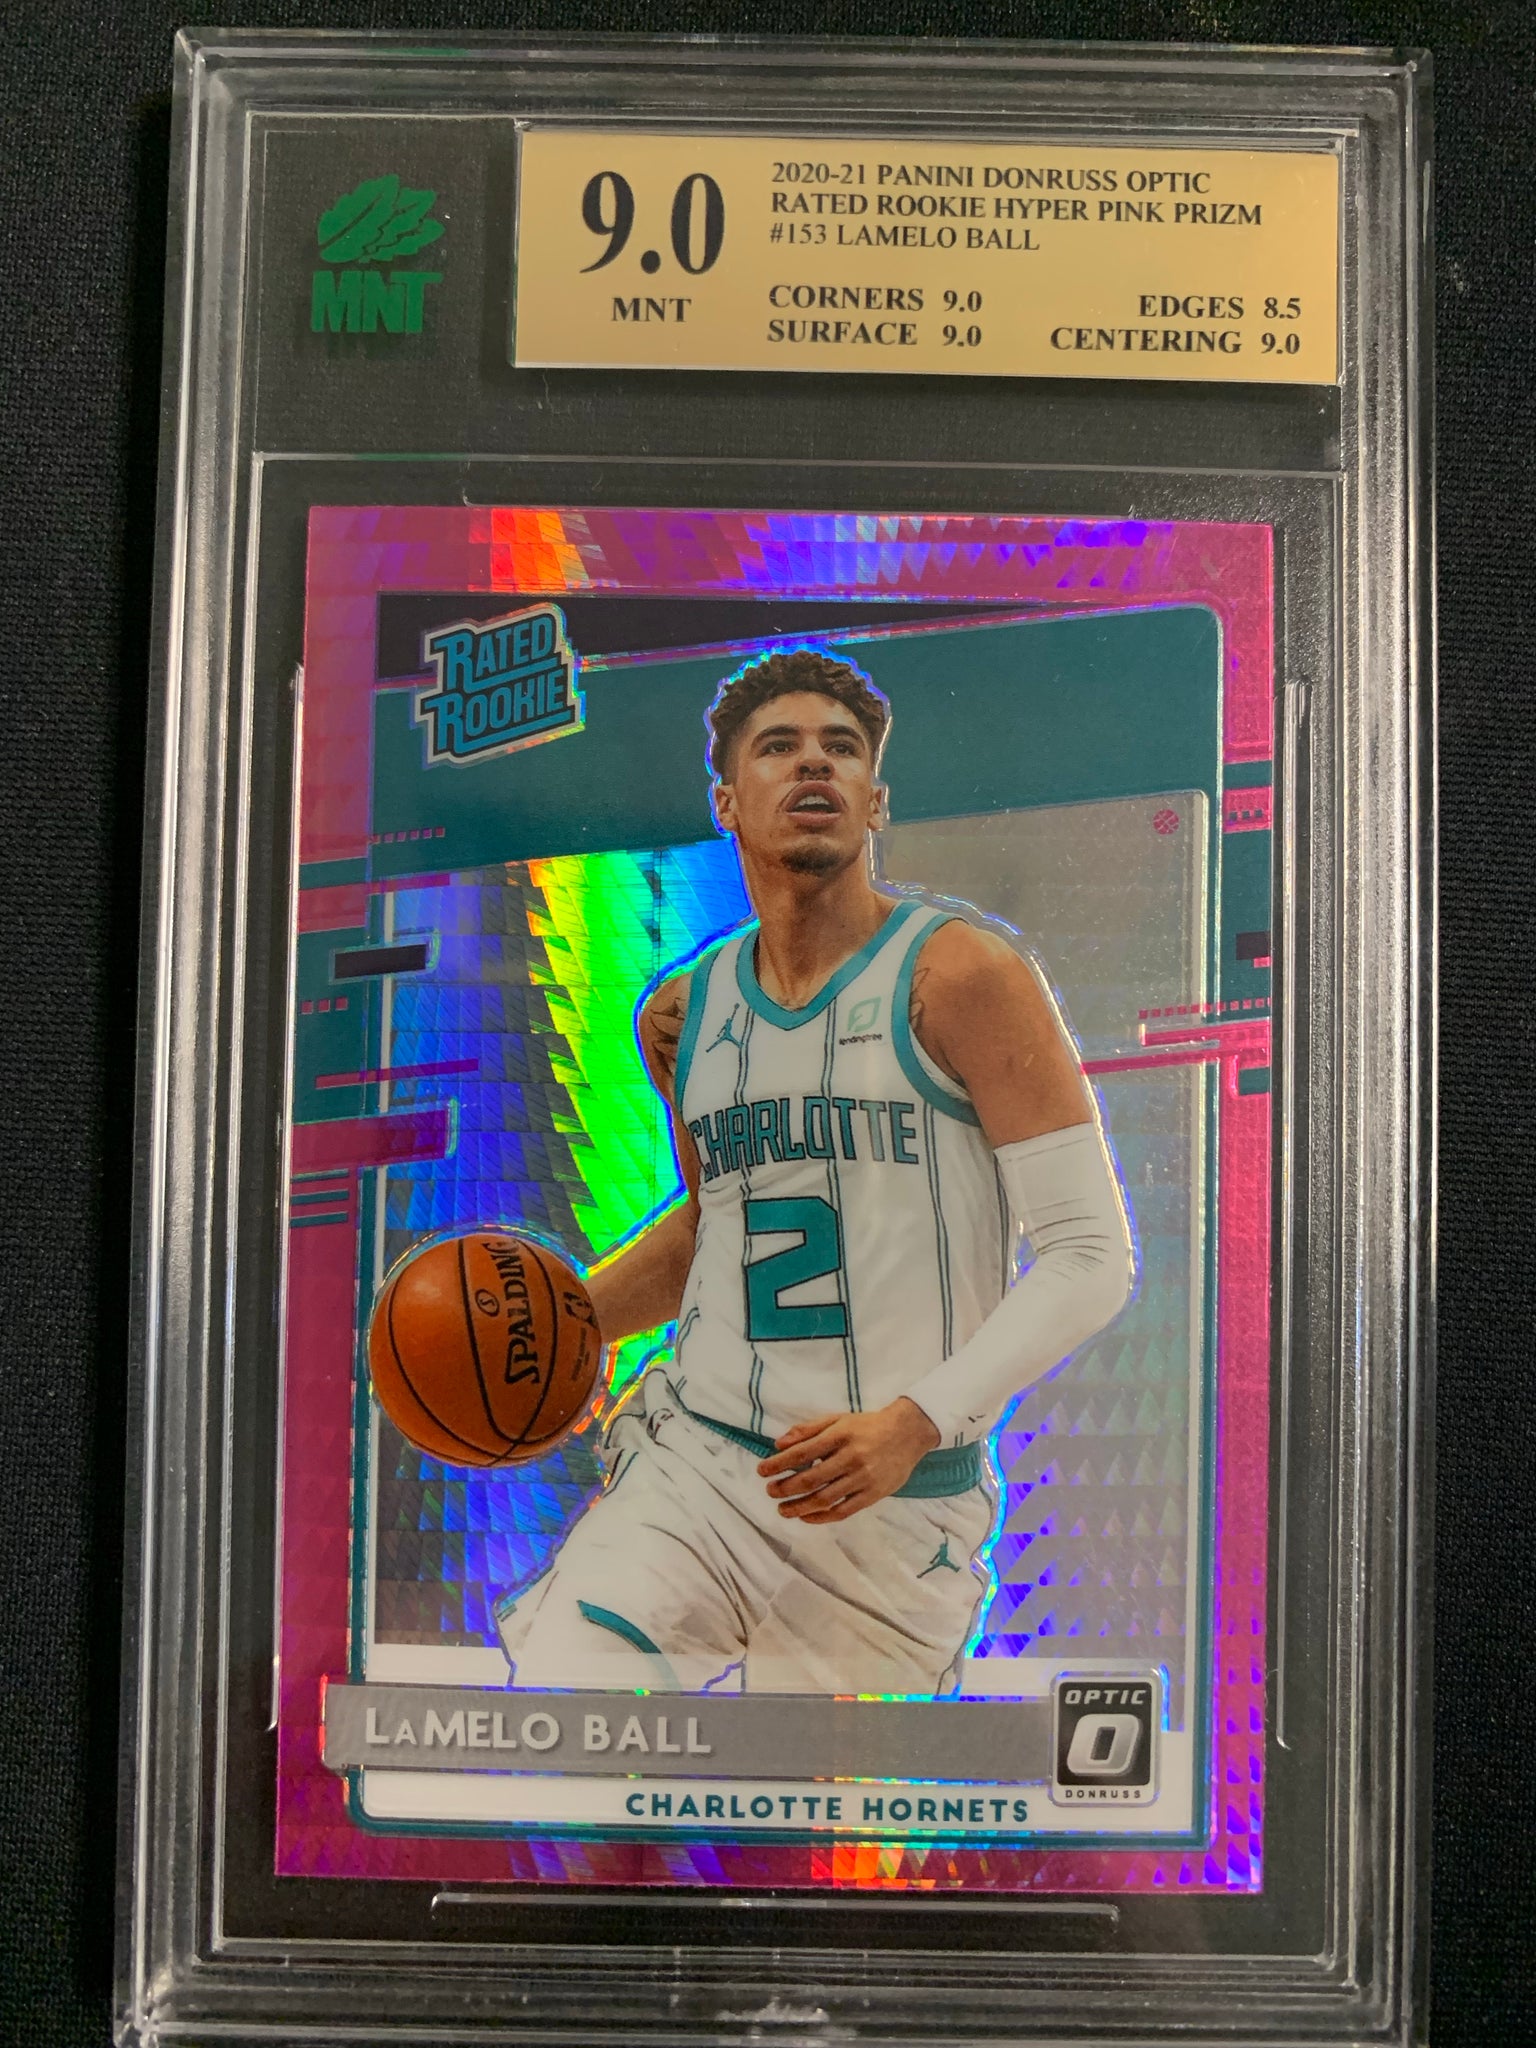 2020-2021 PANINI DONRUSS OPTIC NBA BASKETBALL #153 CHARLOTTE HORNETS - LAMELO BALL HYPER PINK PRIZM RATED ROOKIE CARD GRADED MNT 9.0 MINT